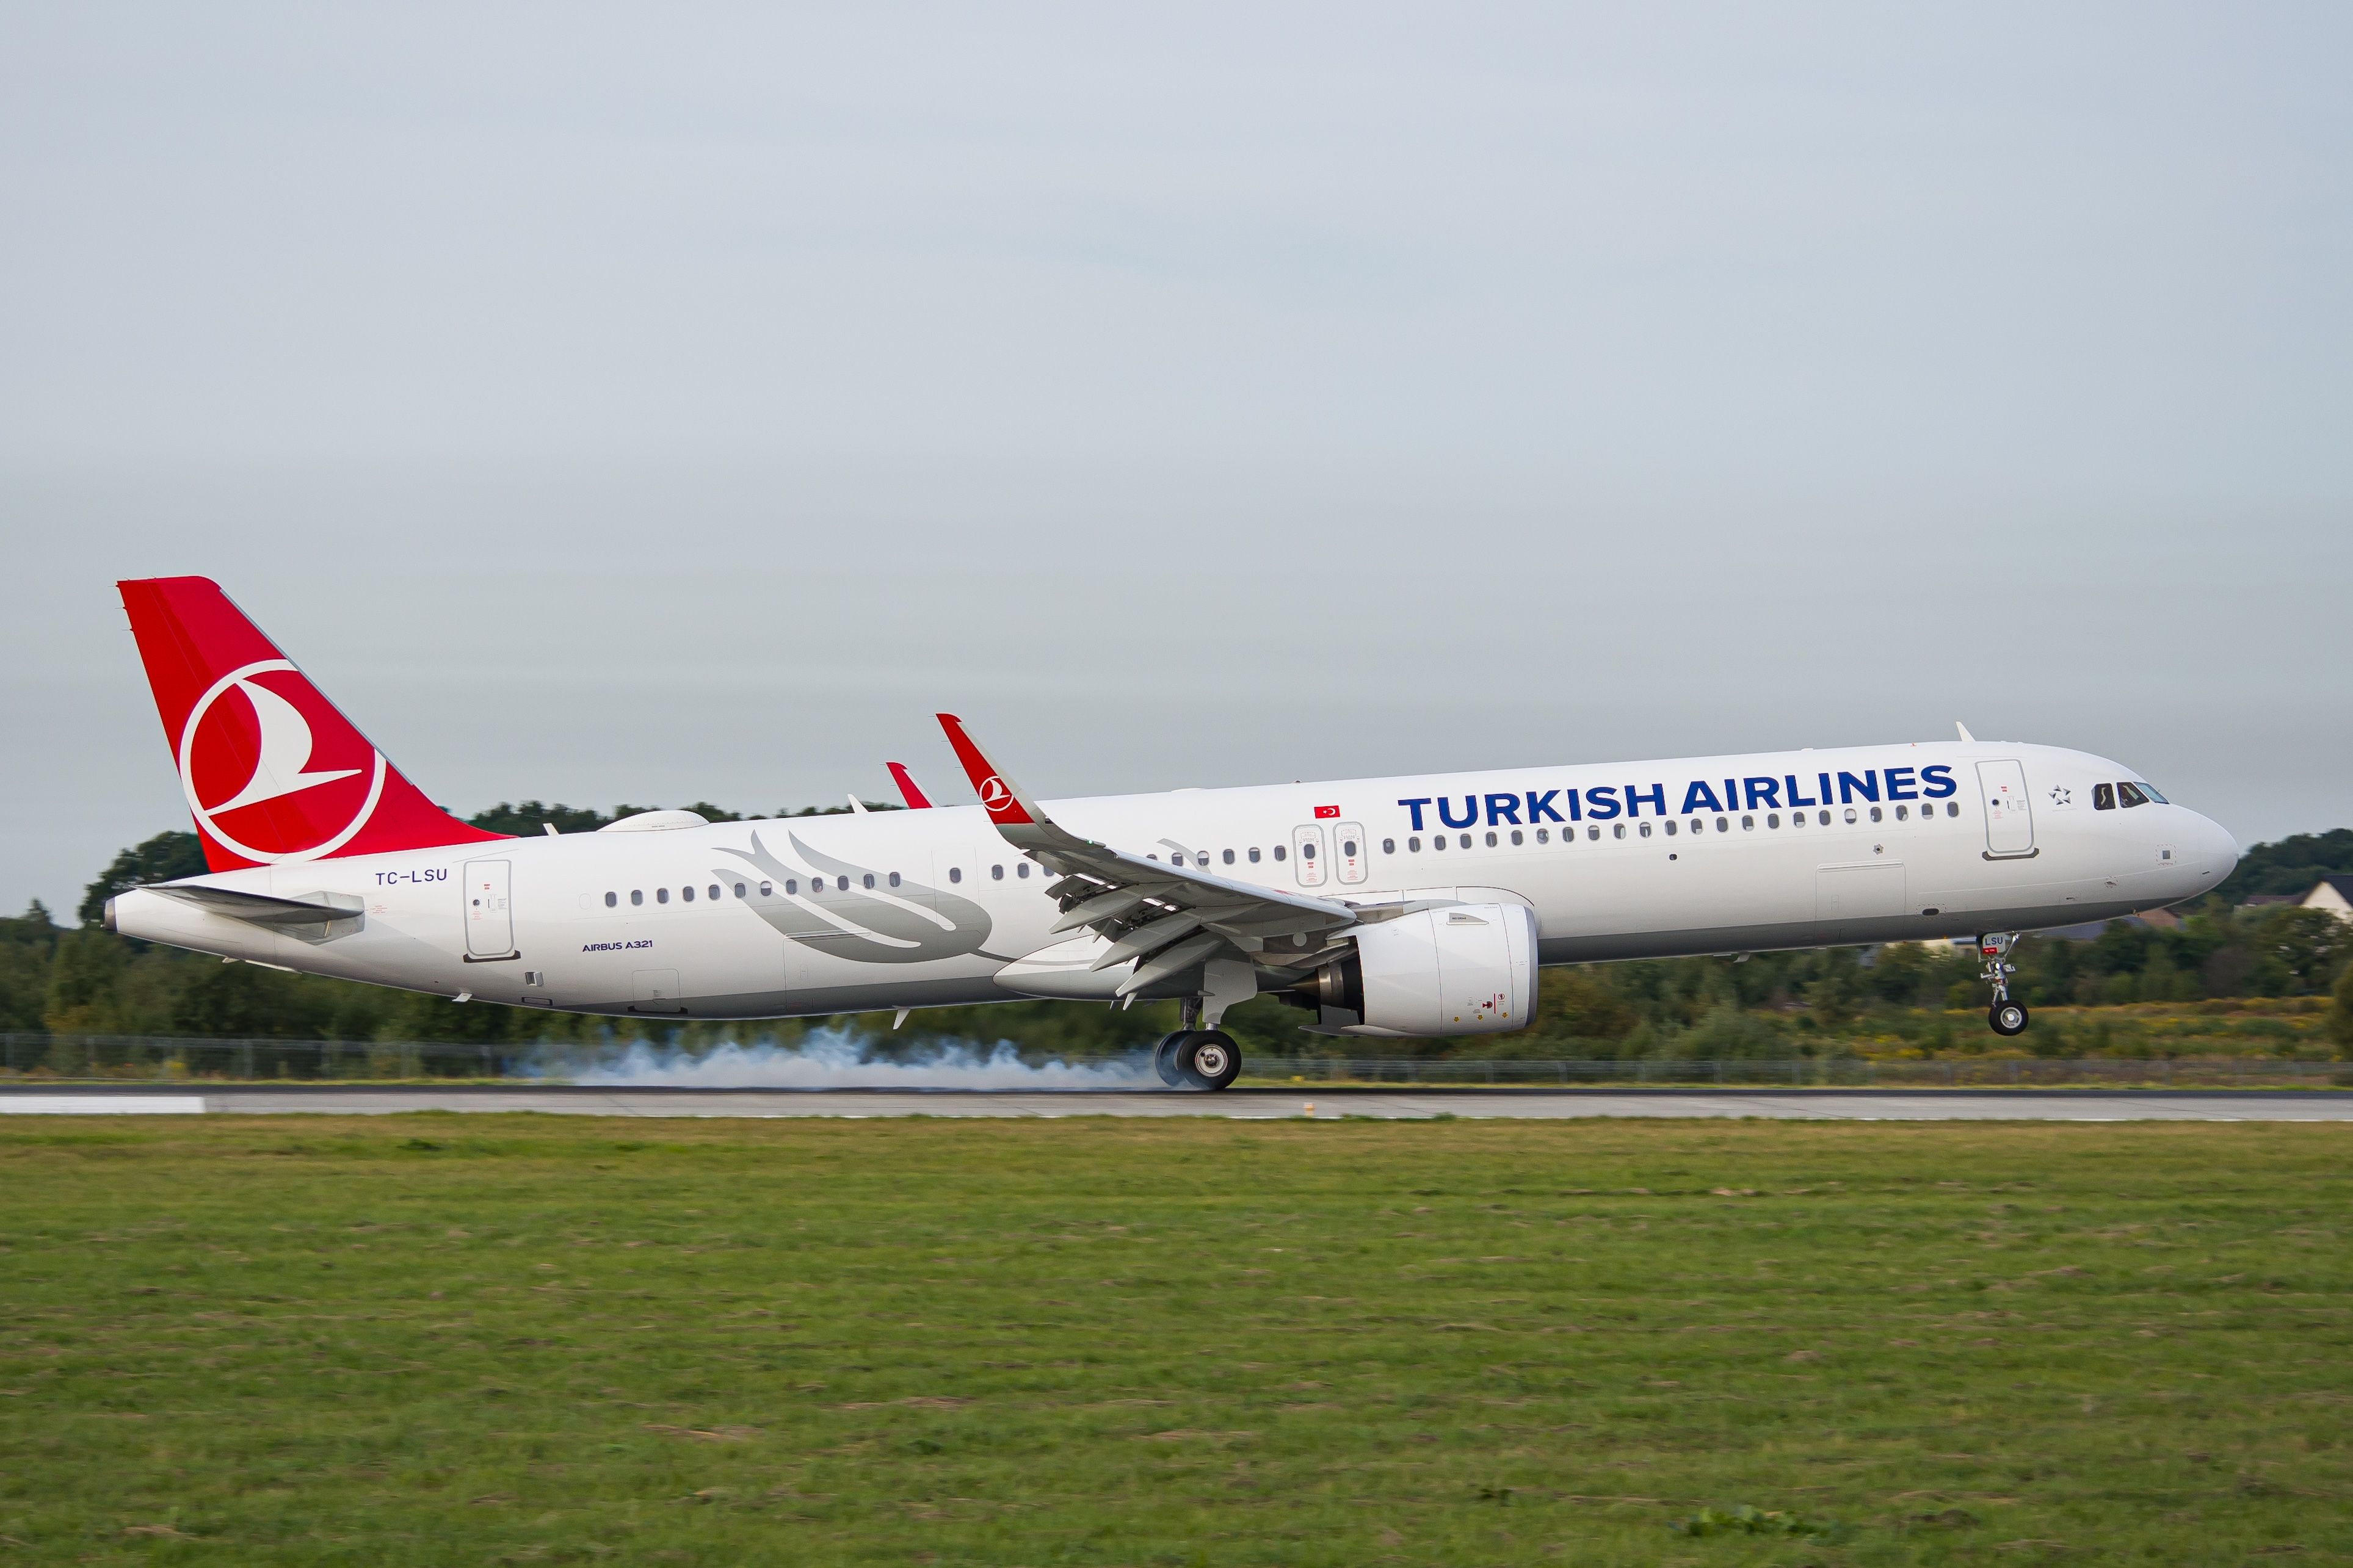 A Turkish Airlines A321 as it lands on a runway.